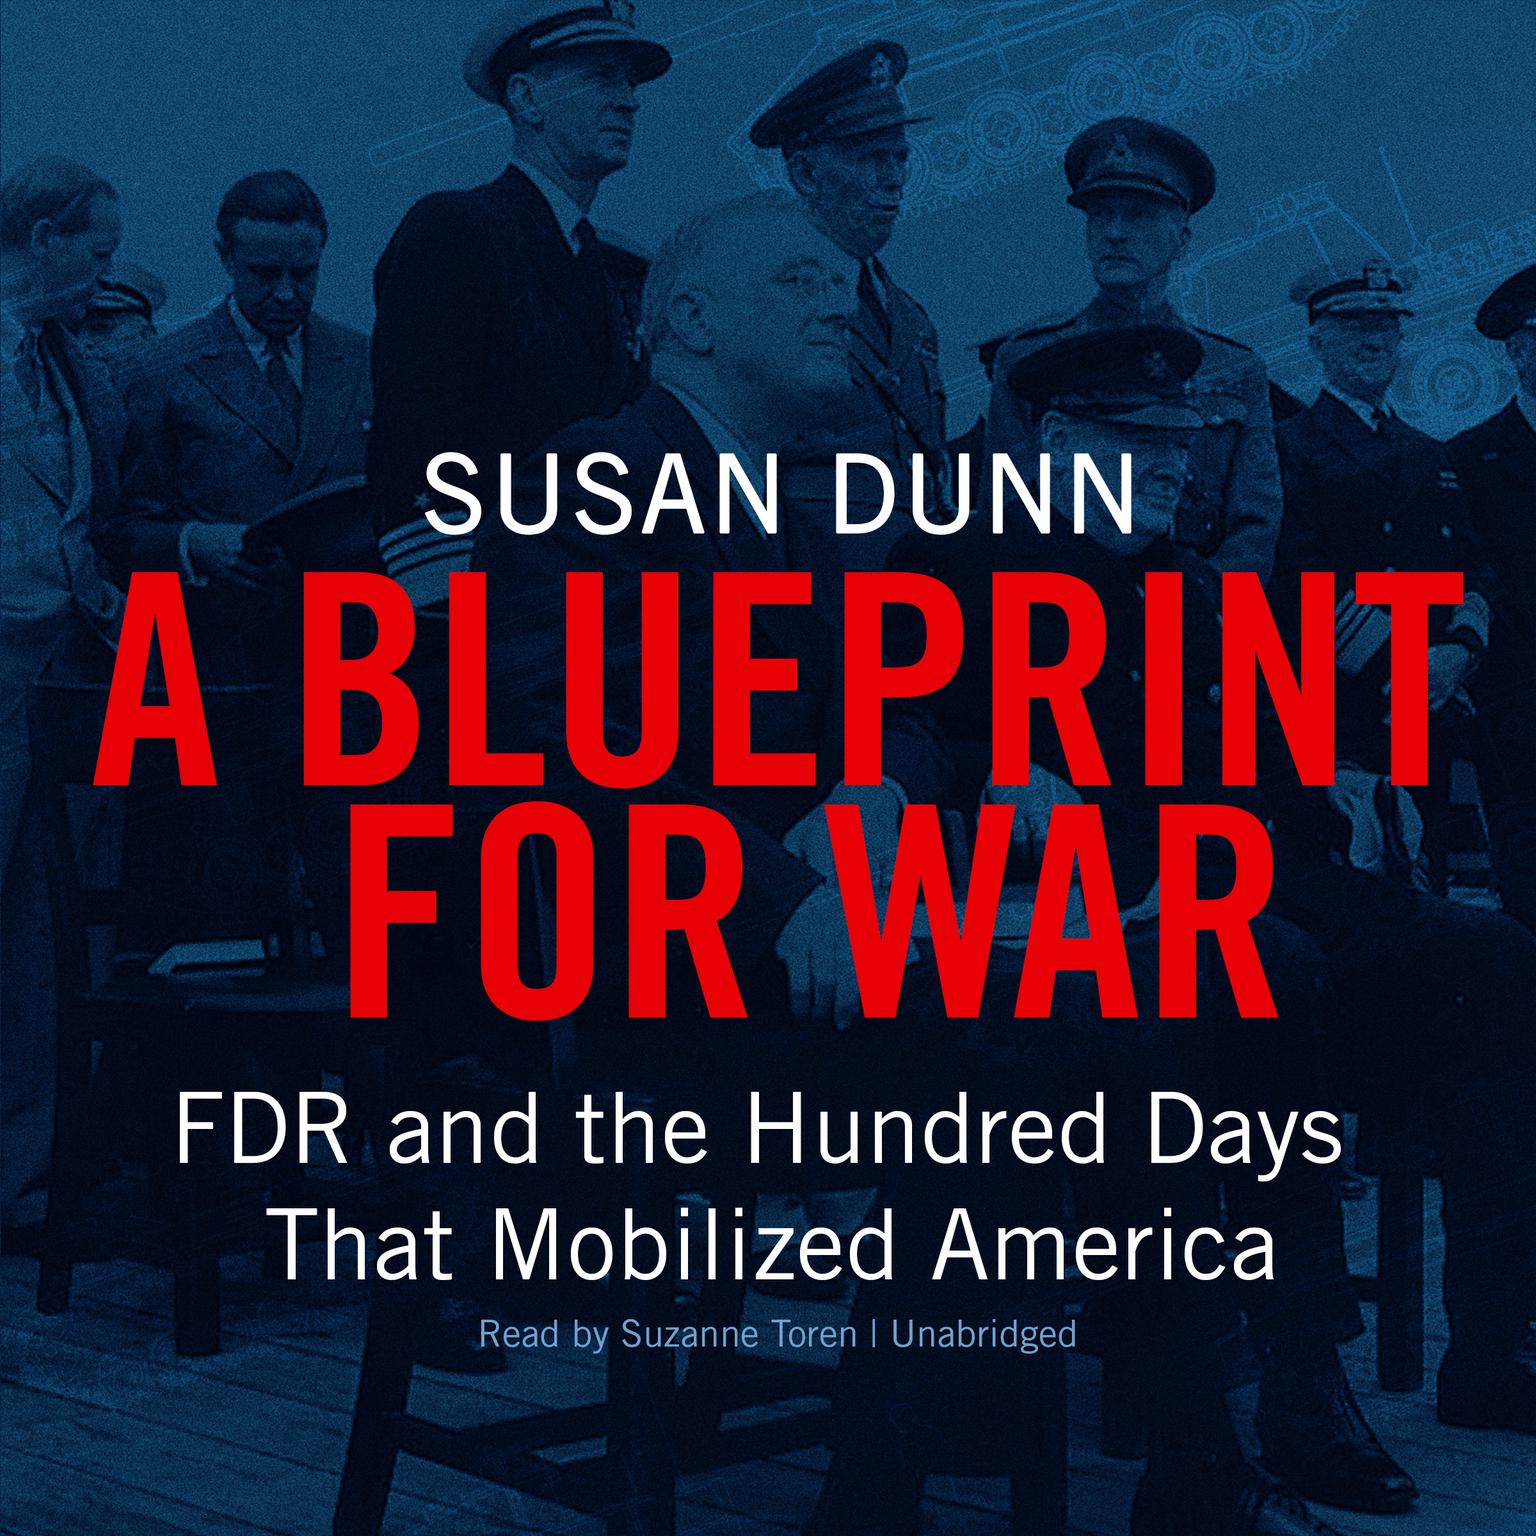 A Blueprint for War: FDR and the Hundred Days That Mobilized America Audiobook, by Susan Dunn